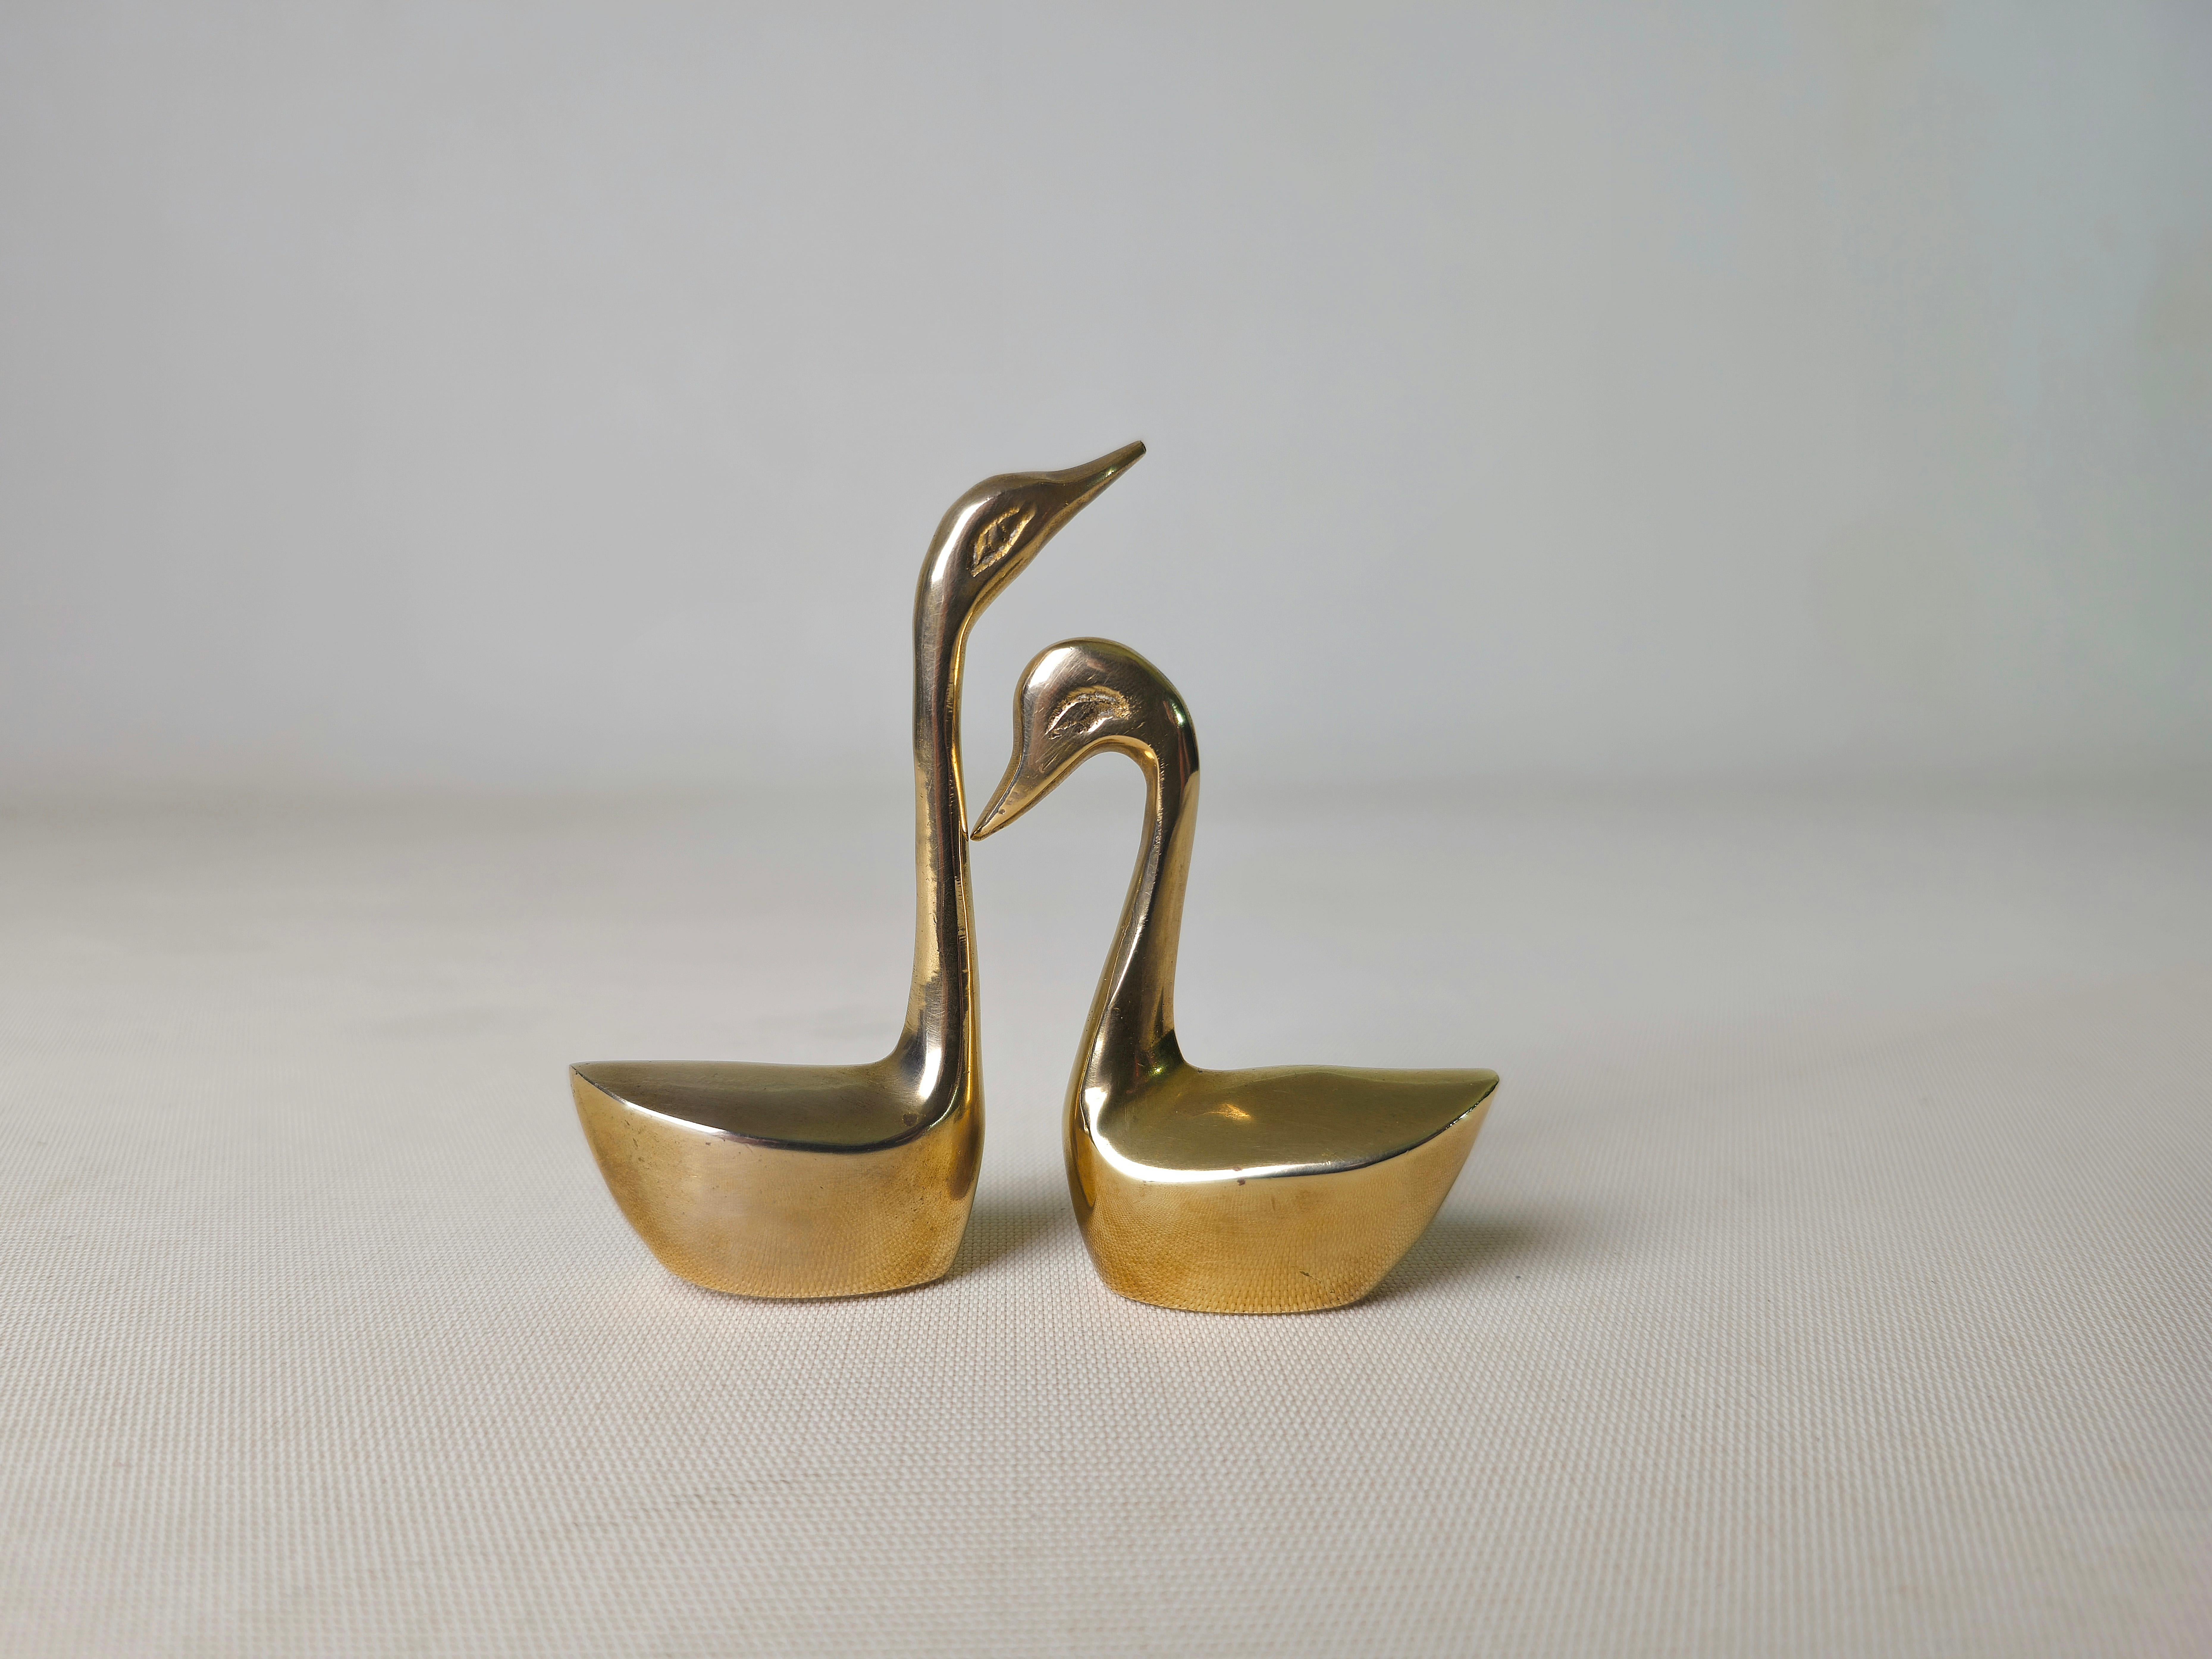 Nice ducks all in brass in different sizes.
Second duck measurements: H 6.5  L 5  D 2.3

Weight: 130 grams

Note: We try to offer our customers an excellent service even in shipments all over the world, collaborating with one of the best shipping